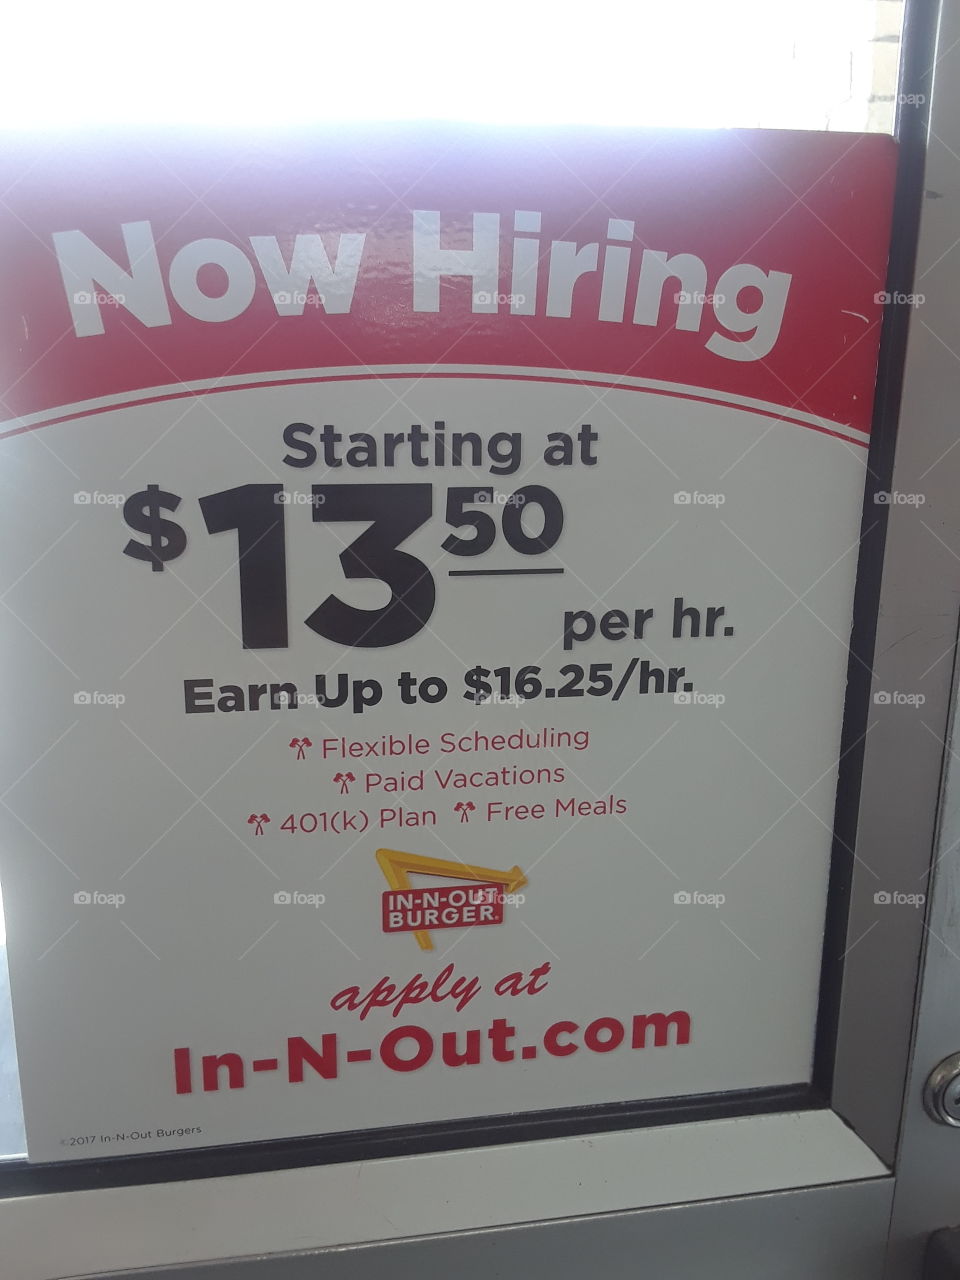 IF U GET Hungry then come to in and out burger.They are hiring. some of the best food in the entire bay area.union city Ca.delicious and tasty